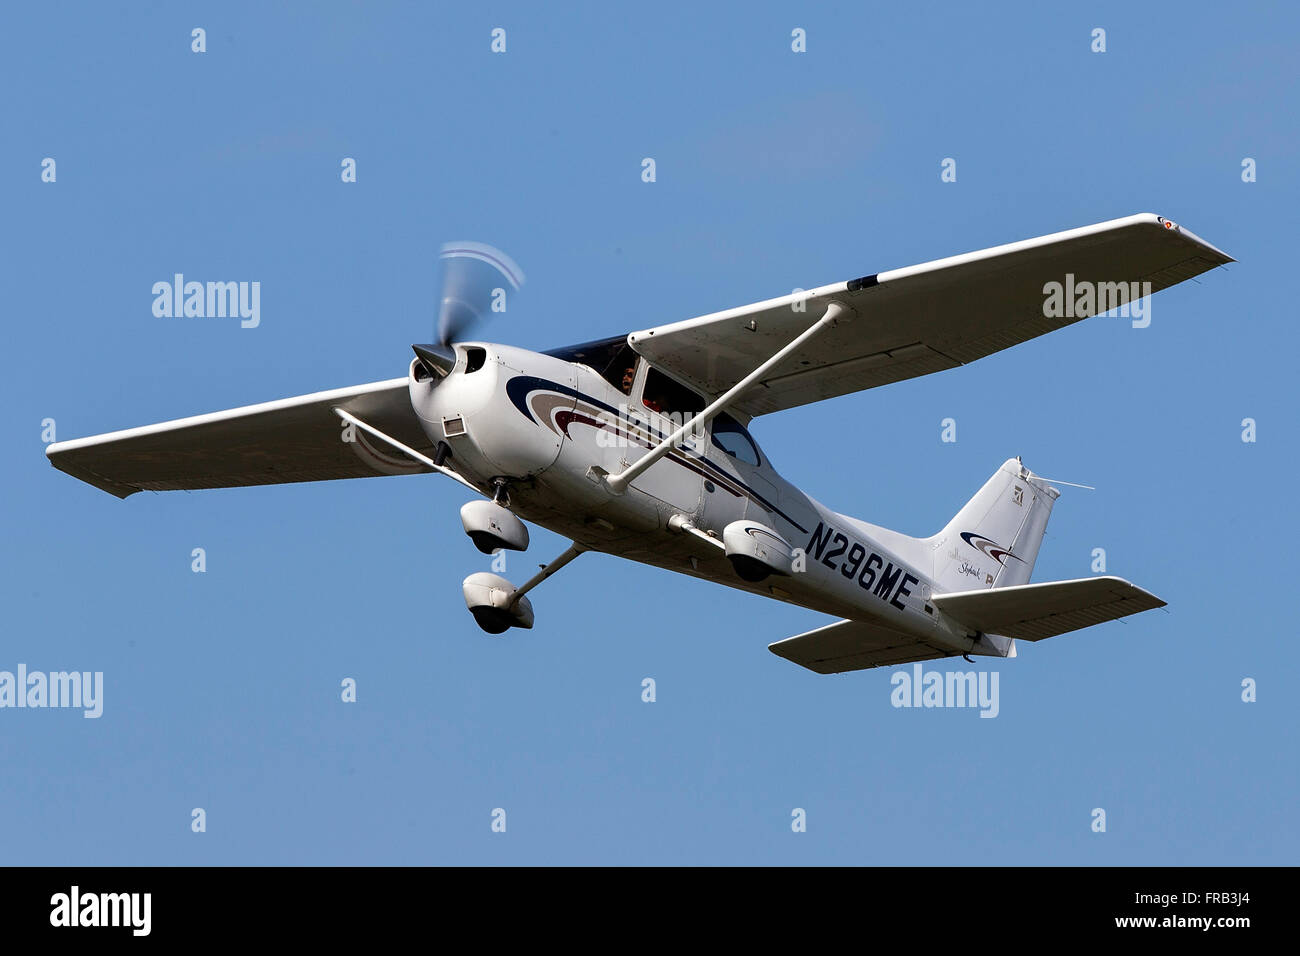 Cessna 172S (registration N296ME) takes off from Palo Alto Airport (KPAO), Palo Alto, California, United States of America Stock Photo